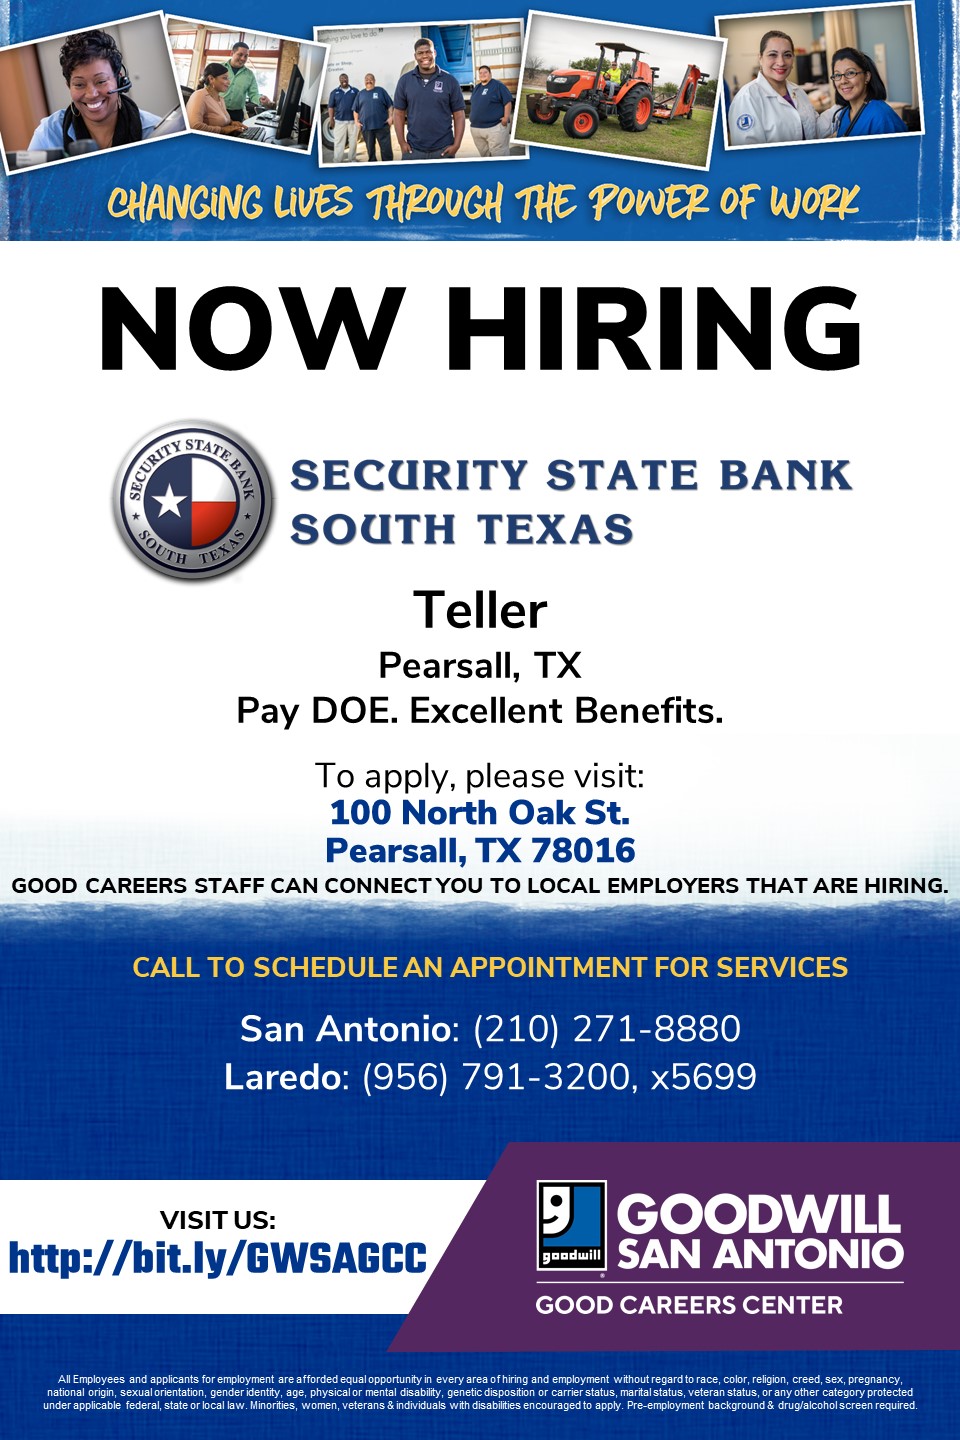 Security State Bank South Texas - Pearsall